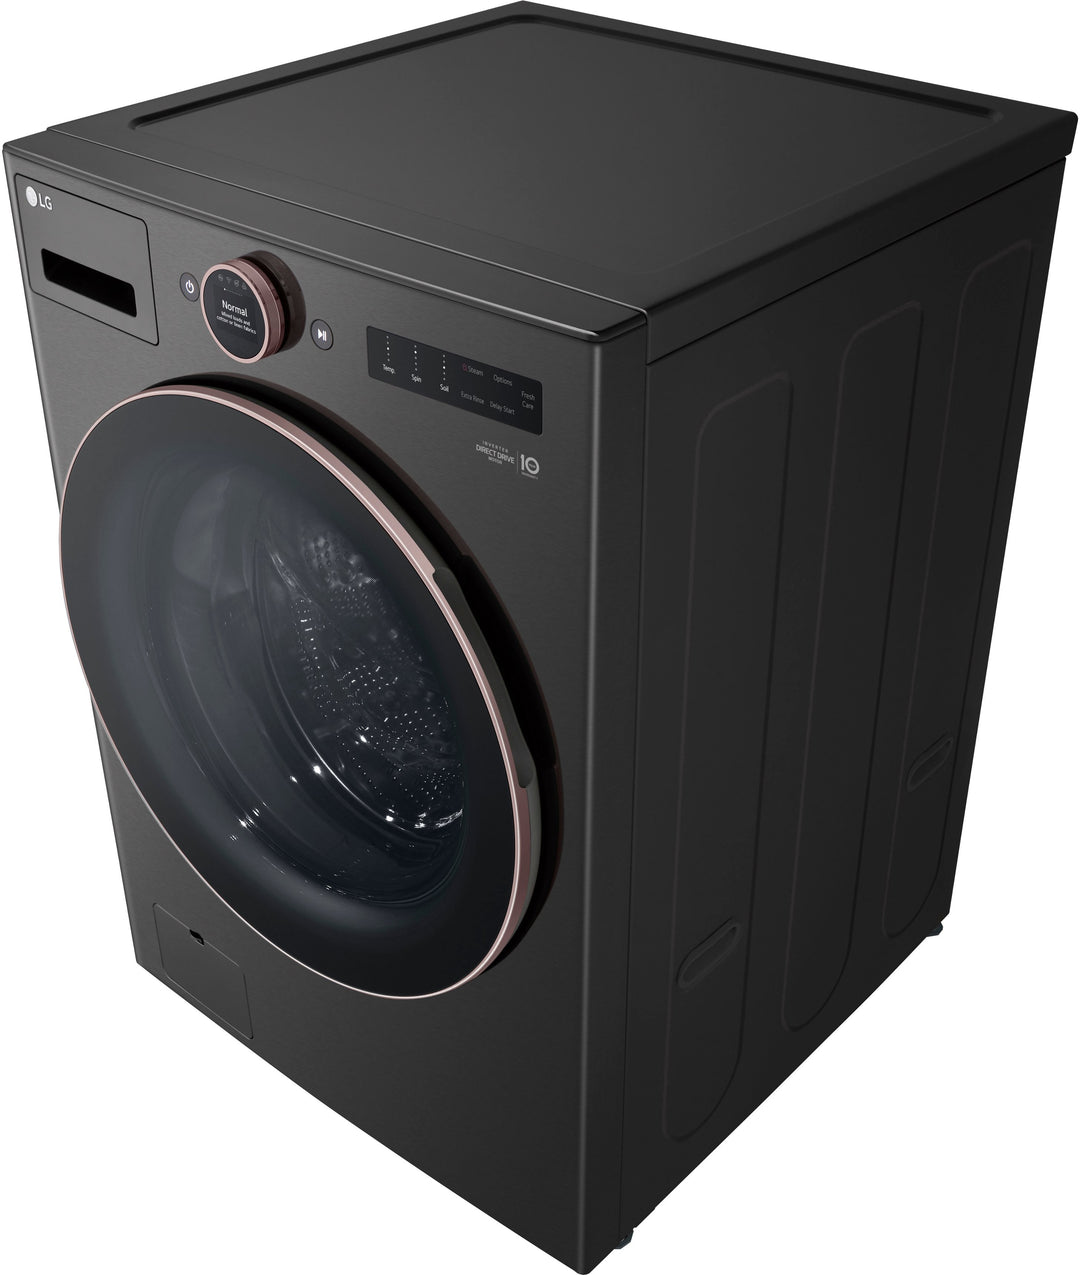 LG - 5.0 Cu. Ft. High-Efficiency Smart Front Load Washer with Steam and TurboWash 360 - Black Steel_4